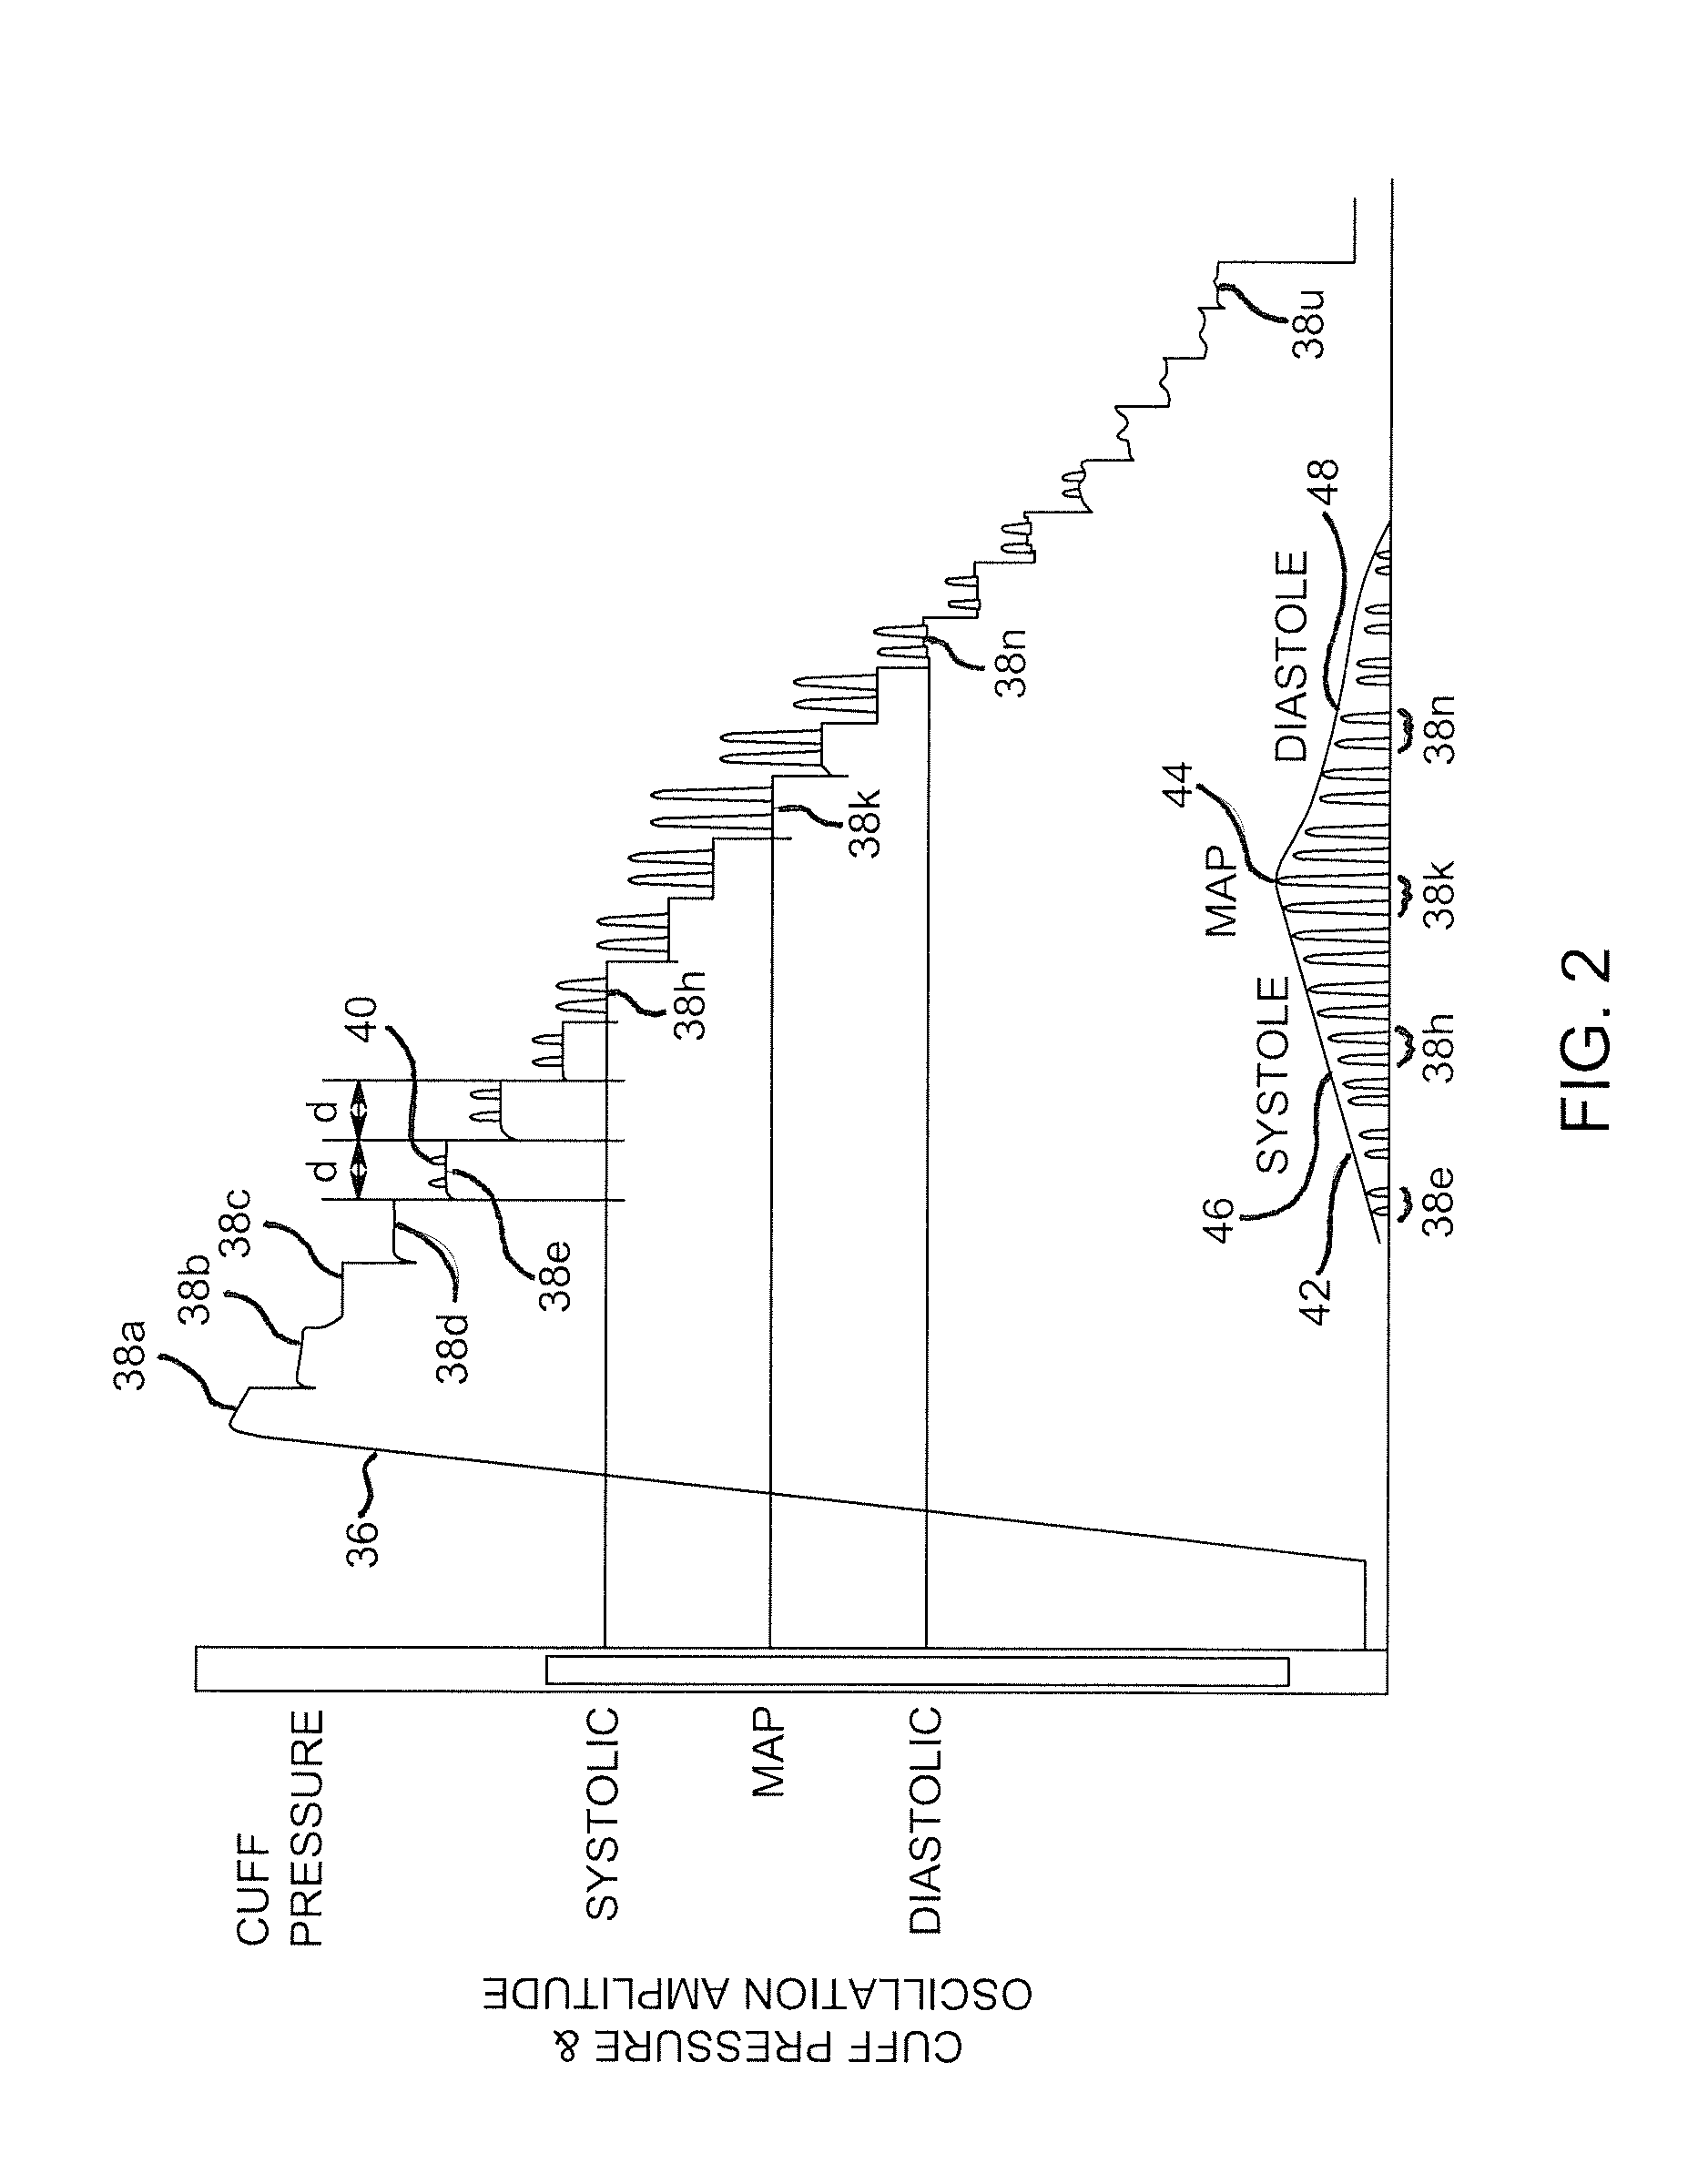 Method and system for controlling non-invasive blood pressure determination based on other physiological parameters